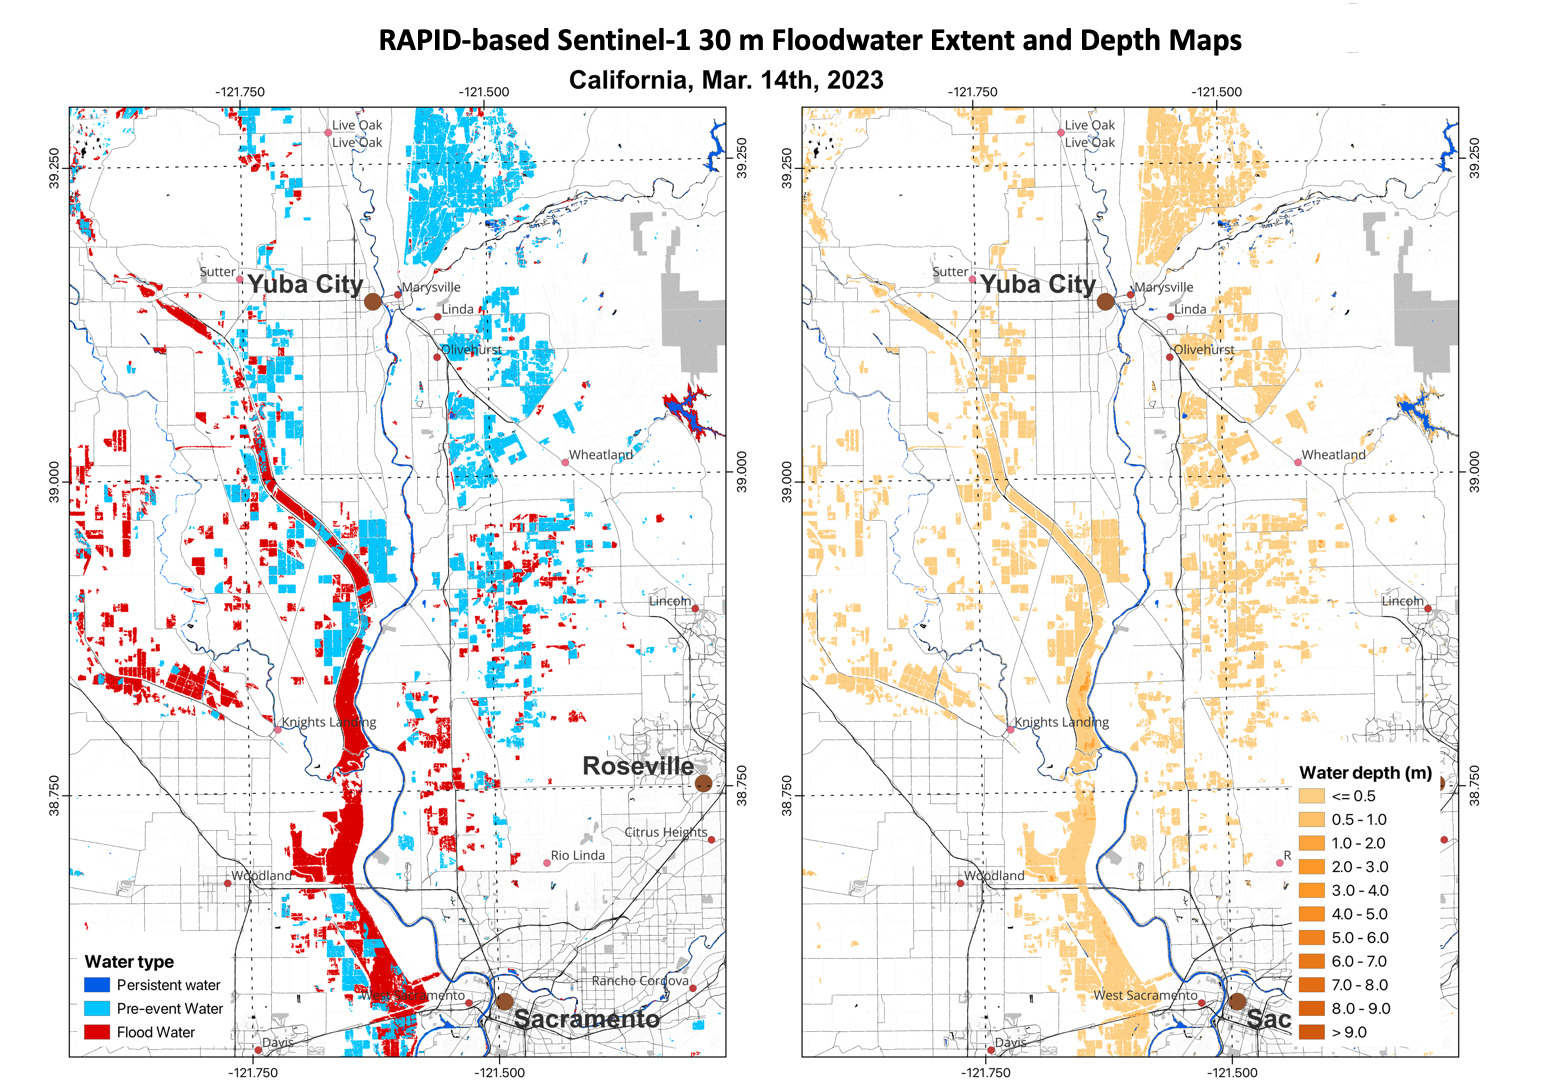 Figure 2. The RAPID-based Sentinel-1 30 m floodwater extent and depth maps for an area in California on 03/14/2023.